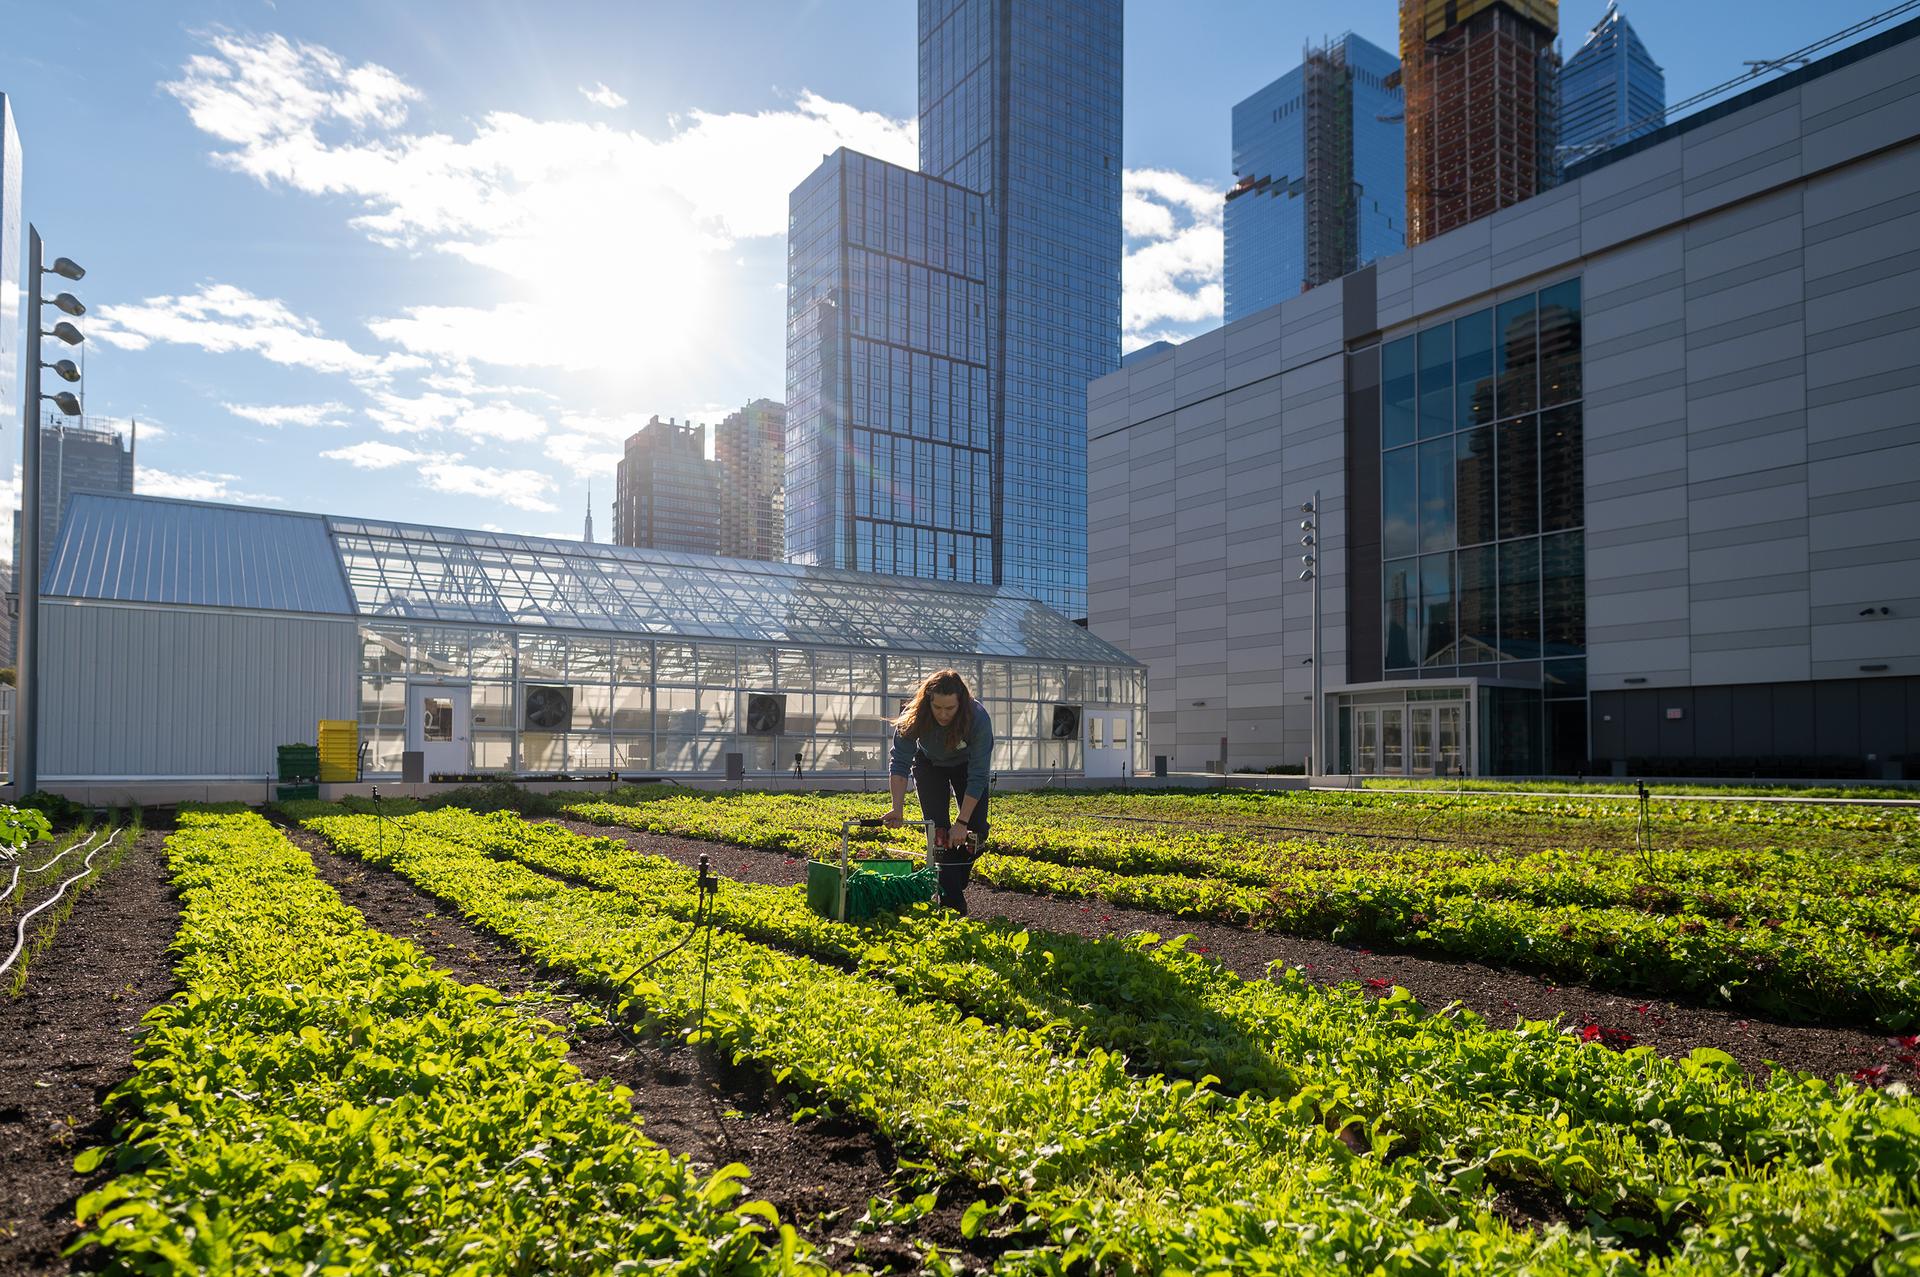 A person works on the rooftop farm atop the expansion of the convention center in Manhattan